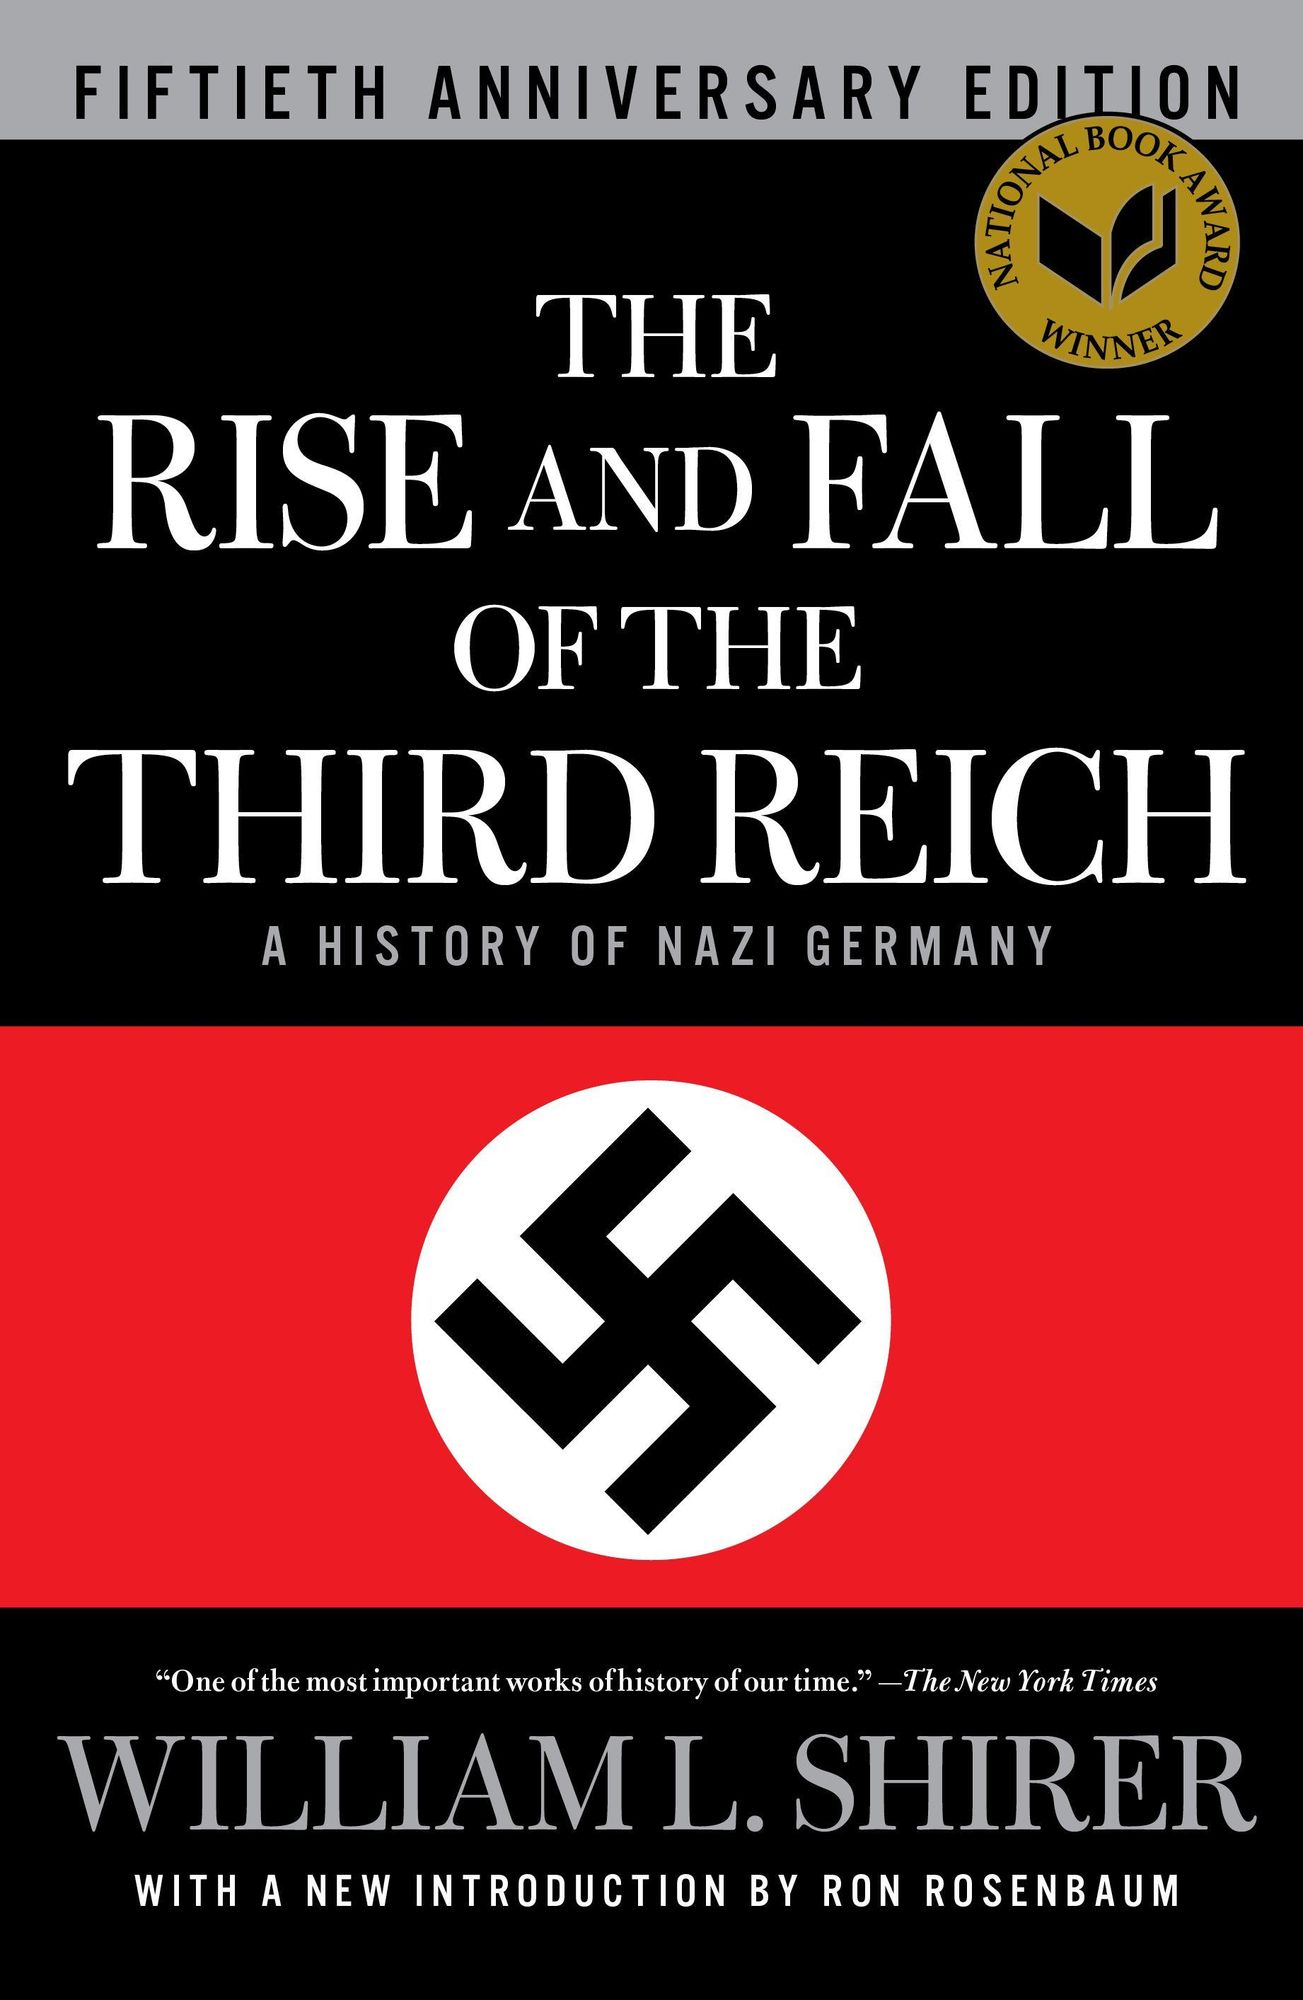 The Rise and Fall of the Third Reich (1990, Simon & Schuster)